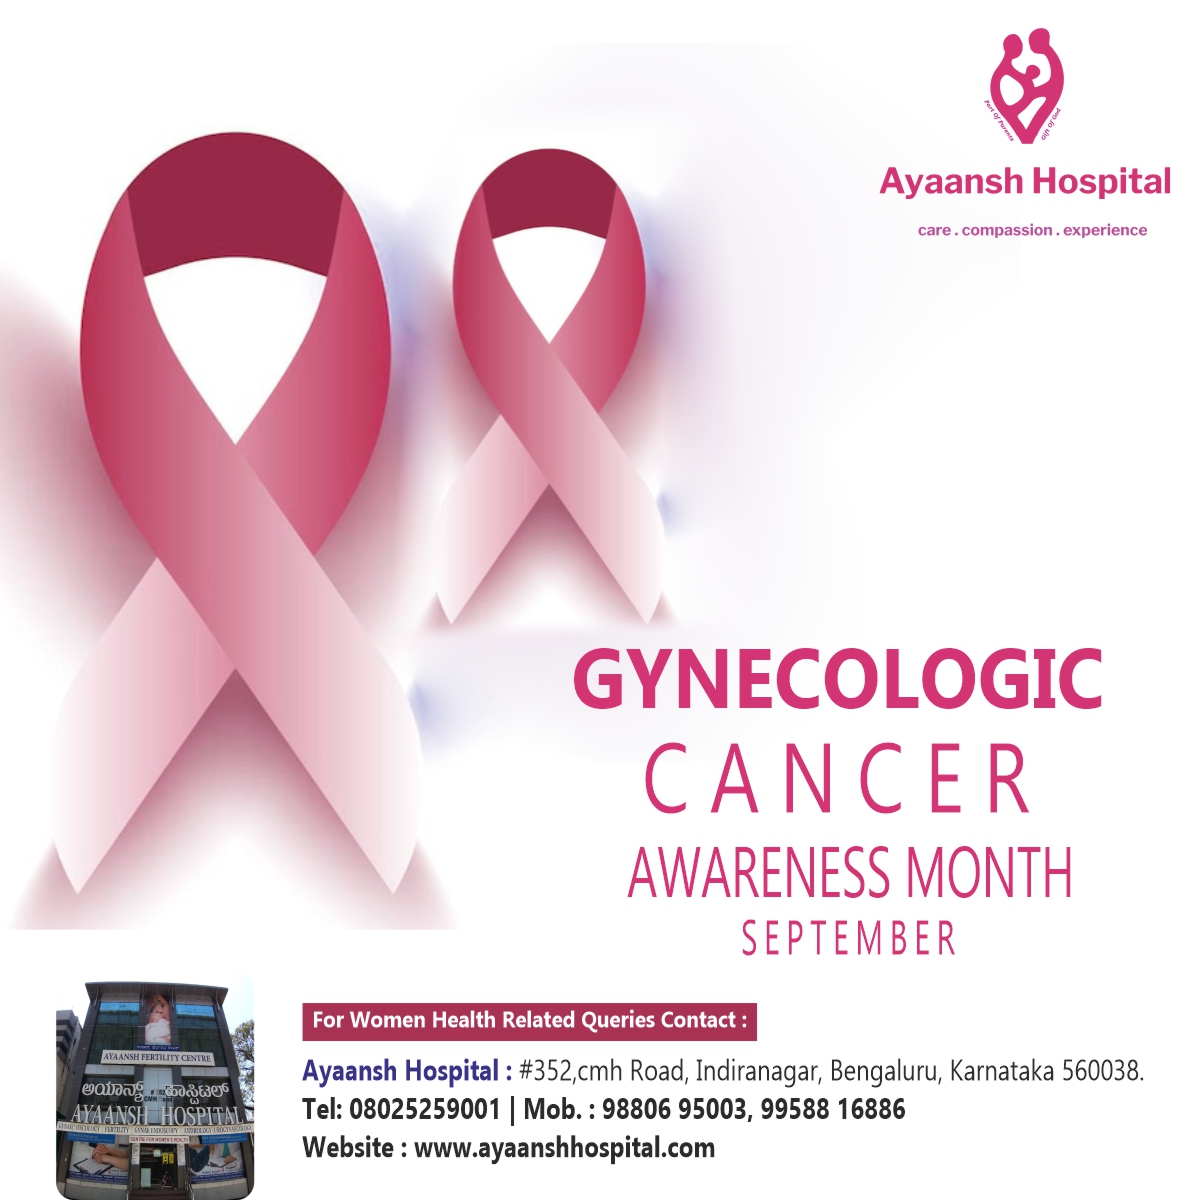 September is Gynecologic Cancer Awareness Month. There are 5 types of cancer that can affect the reproductive organs: cervical cancer, ovarian cancer, uterine/endometrial cancer, vaginal cancer, and vulvar cancer. 

#gynecologicalcancerawareness #gynecologicalcancer
#september